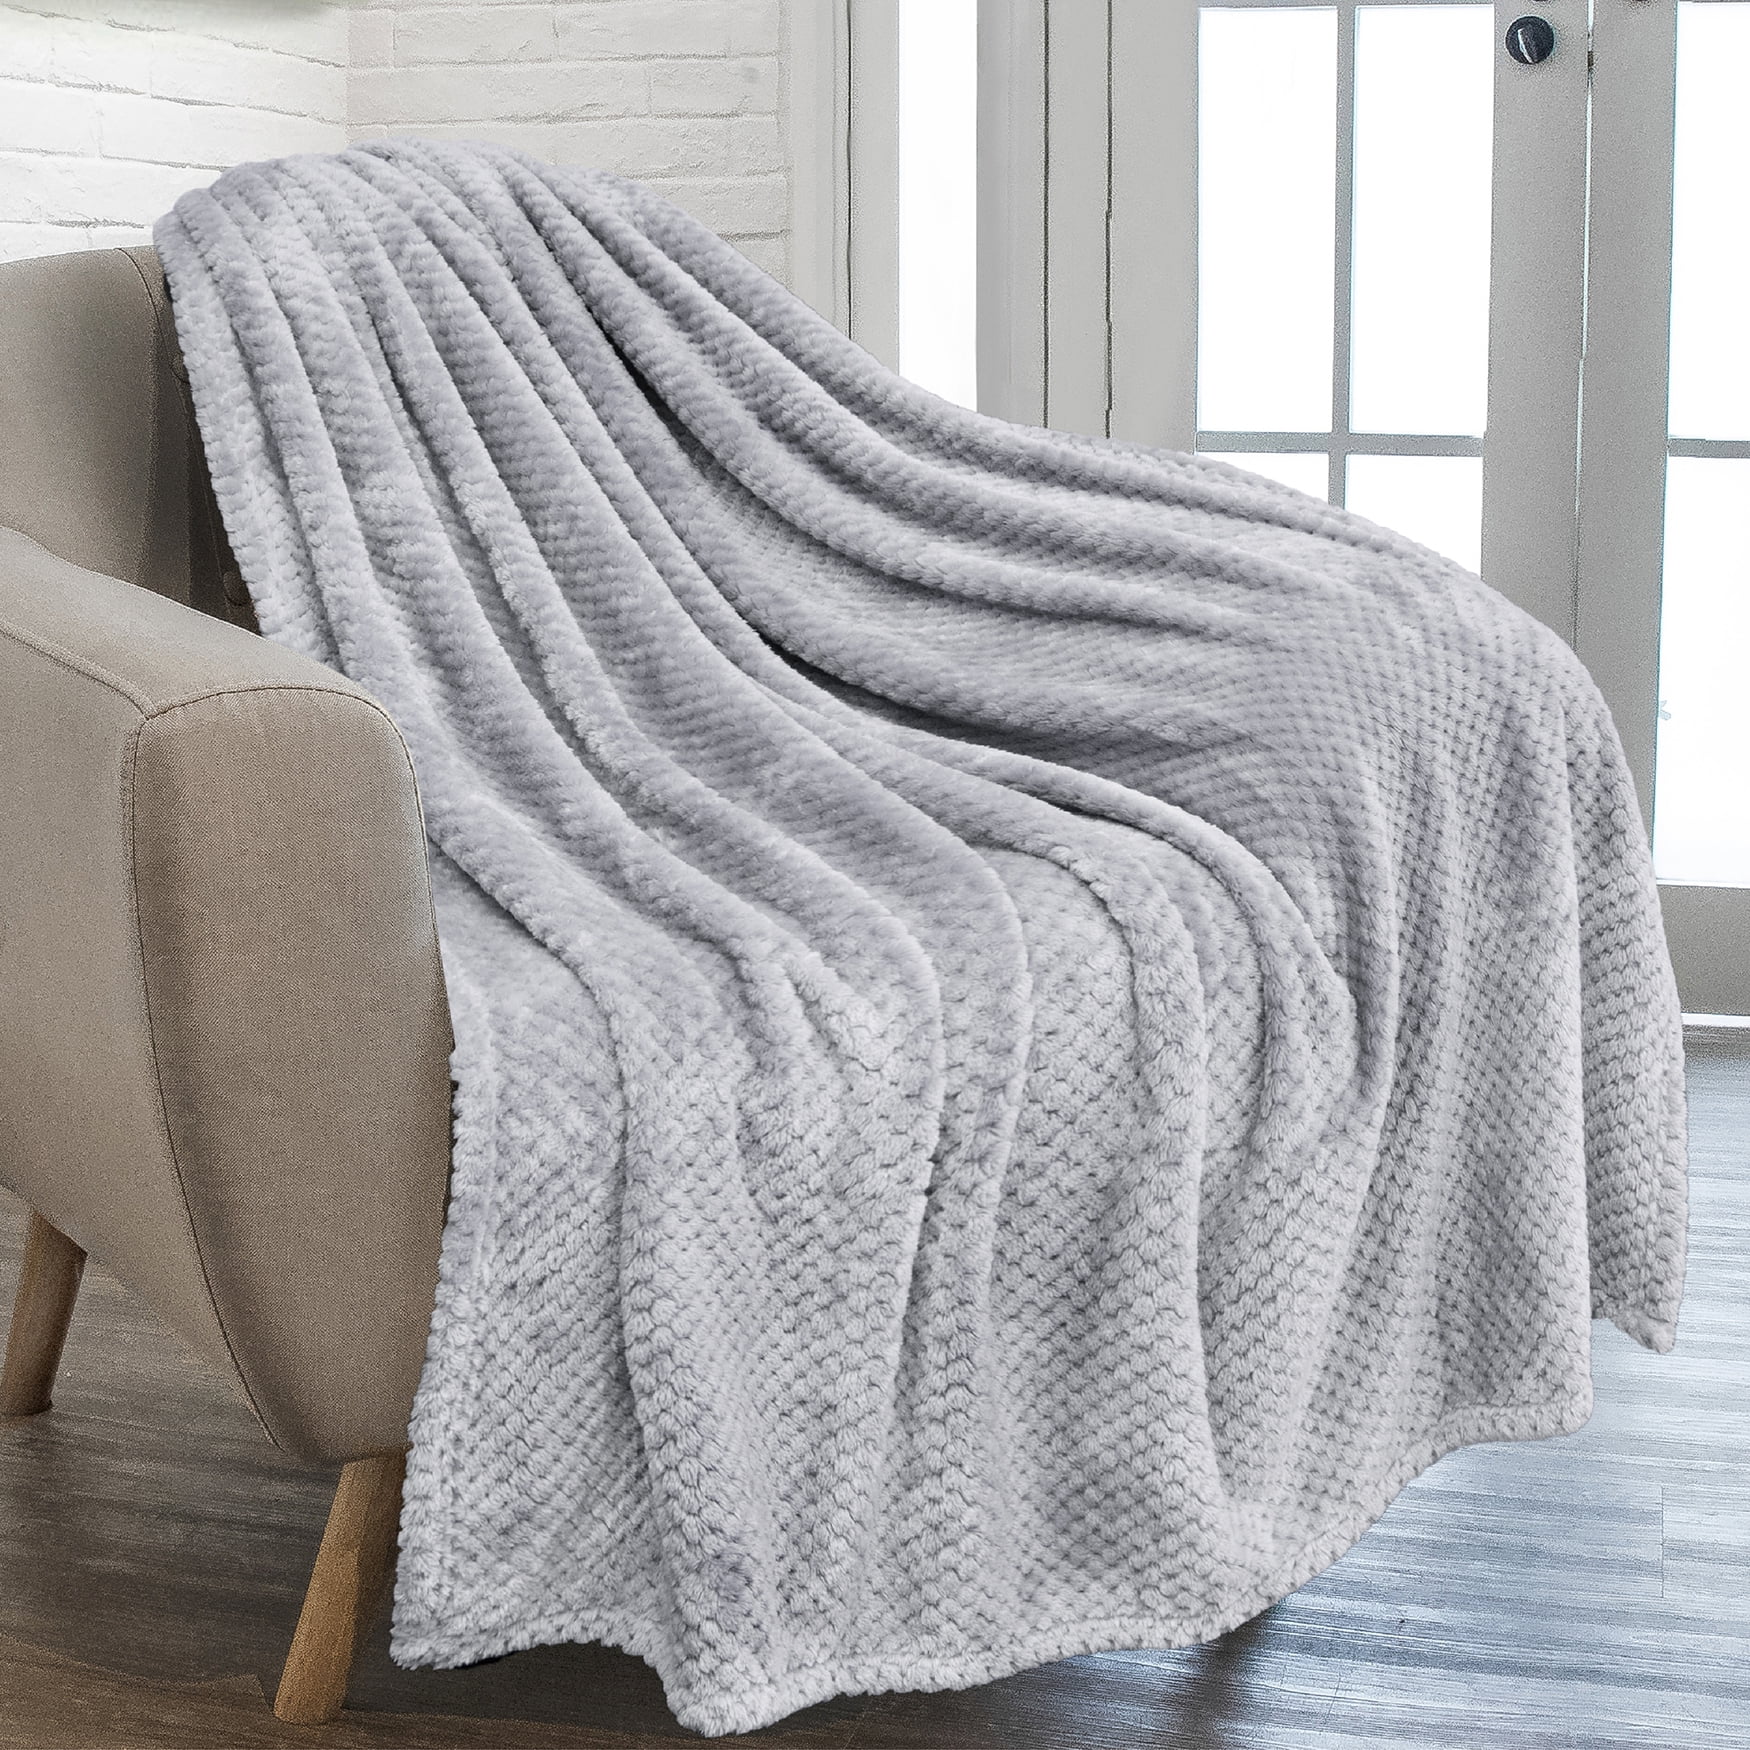 MOONQUEEN Fleece Throw Blanket for Lightweight Silver Gray, 50x60 in Ultra Soft Velvety Texture Plush Fuzzy Cozy Blankets and Throws for Sofa and Living Room